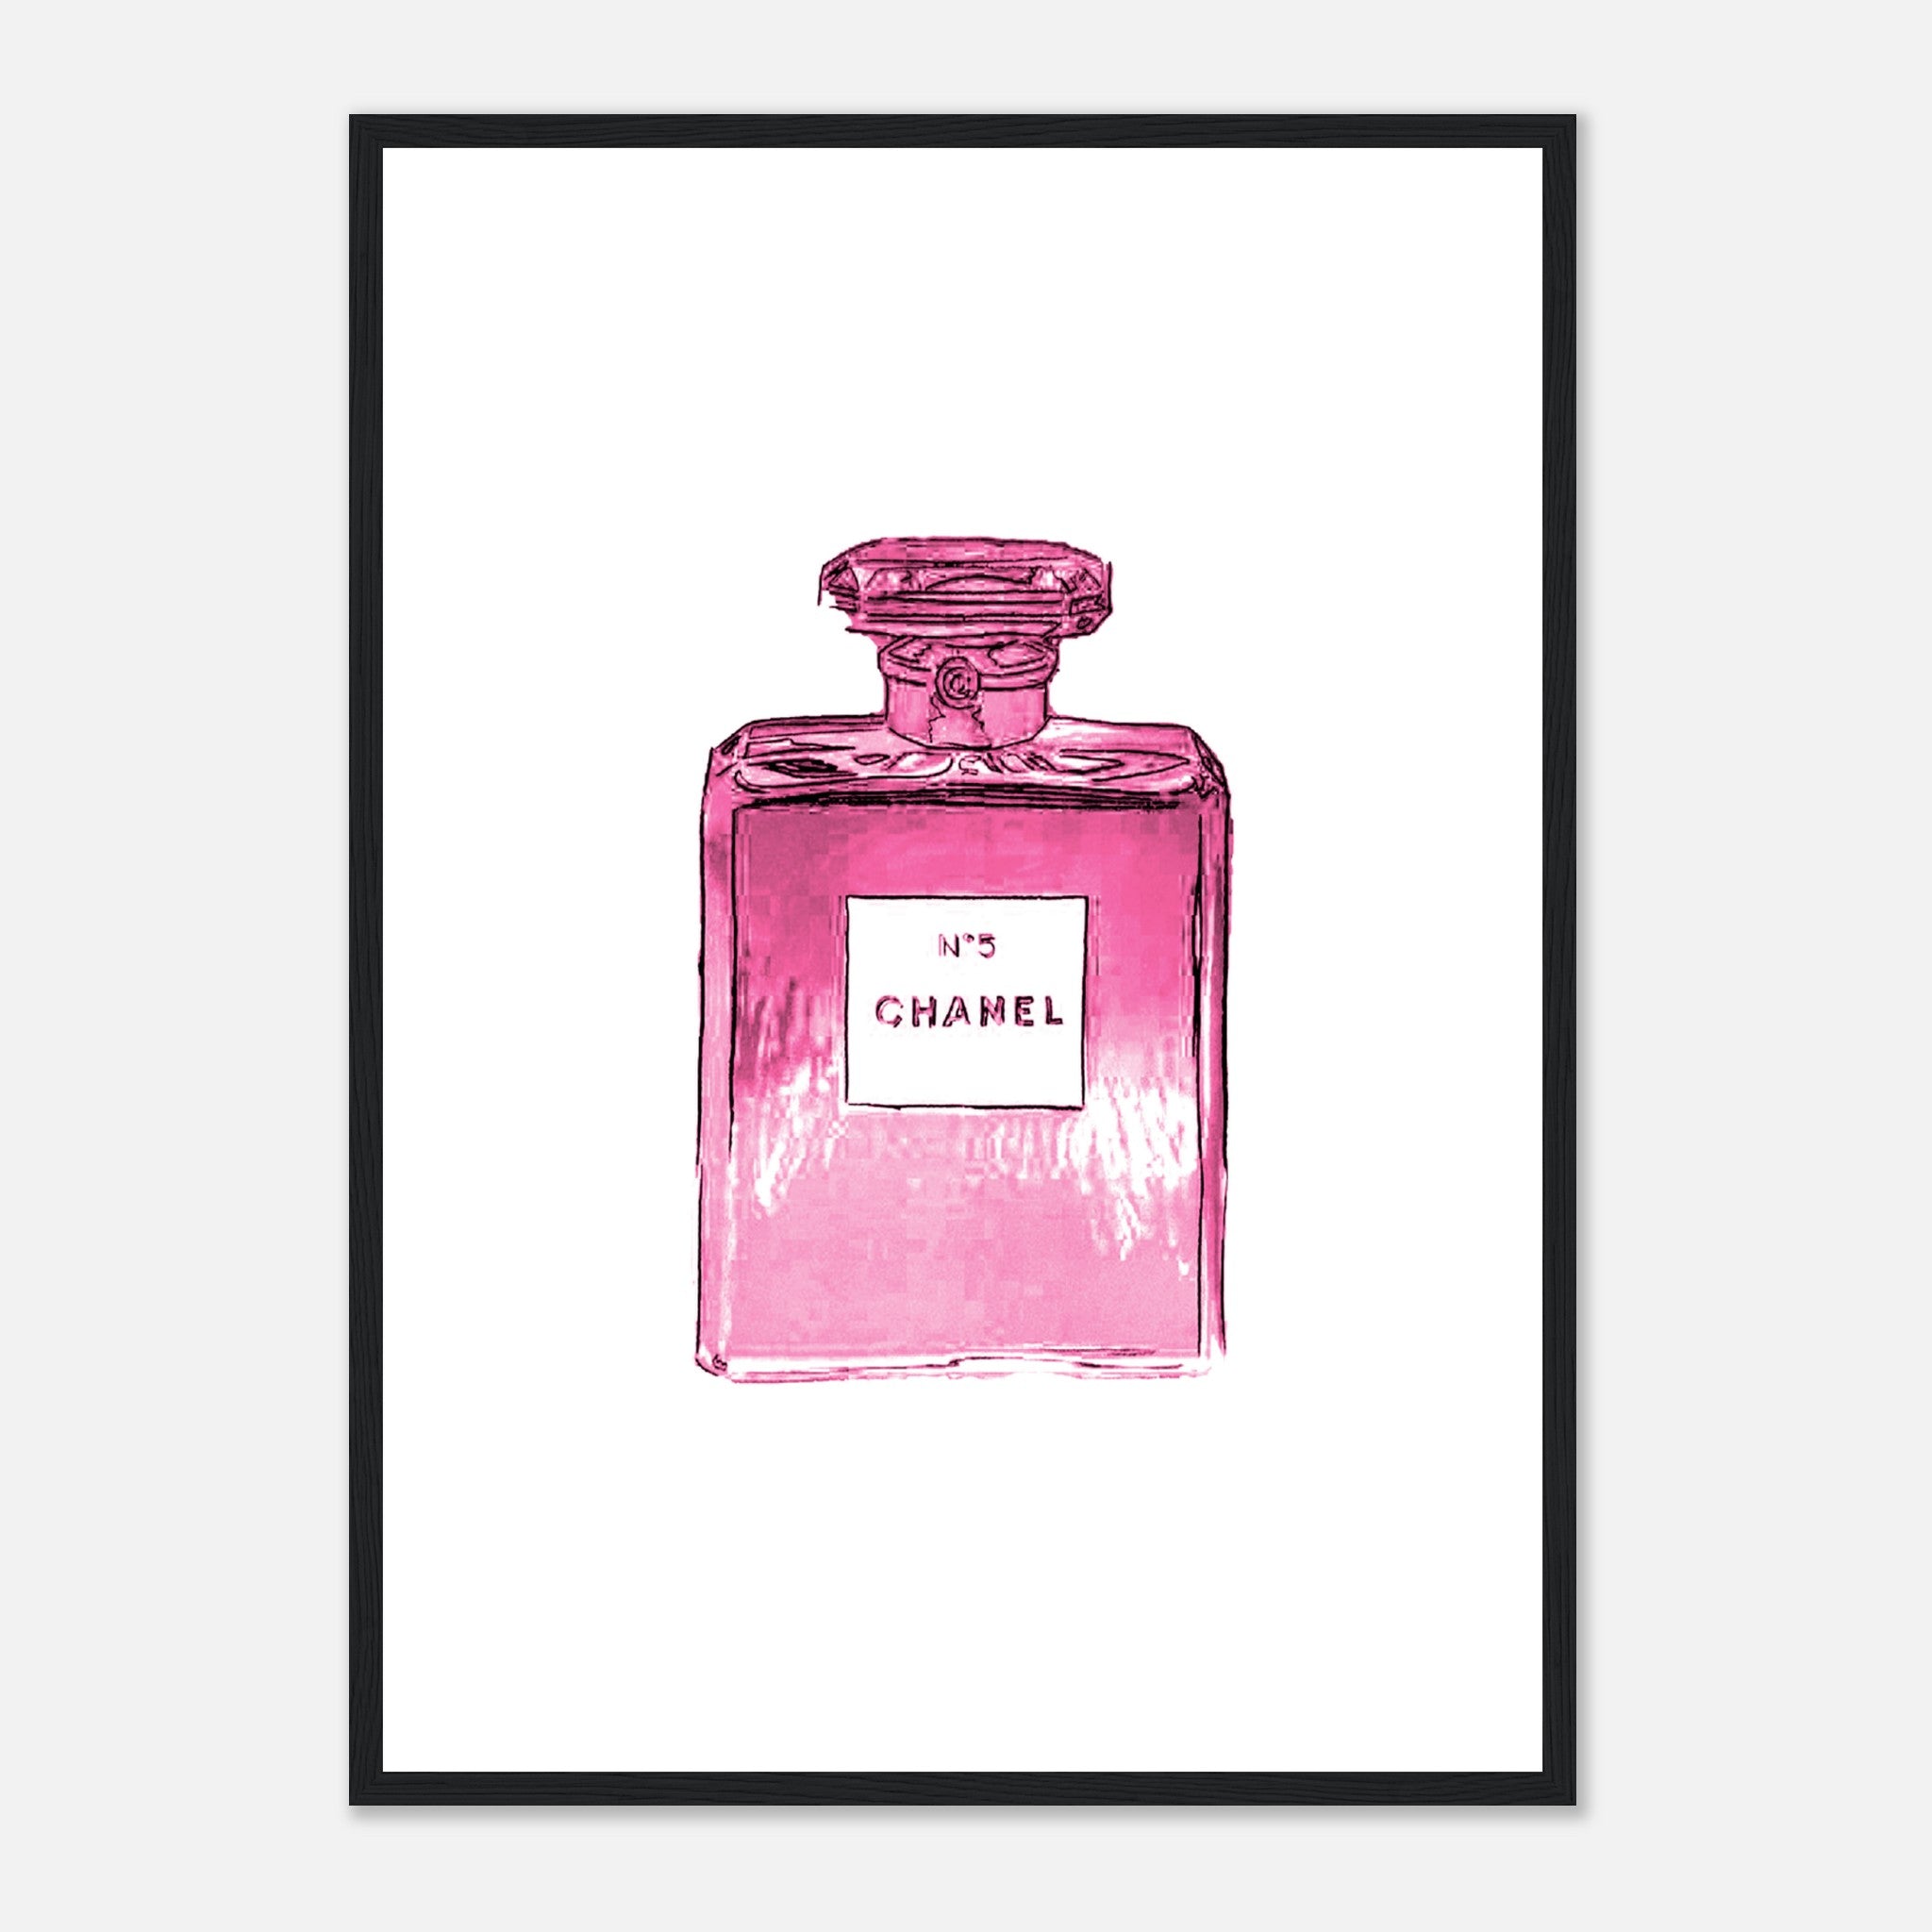 Chanel No5 1 Póster